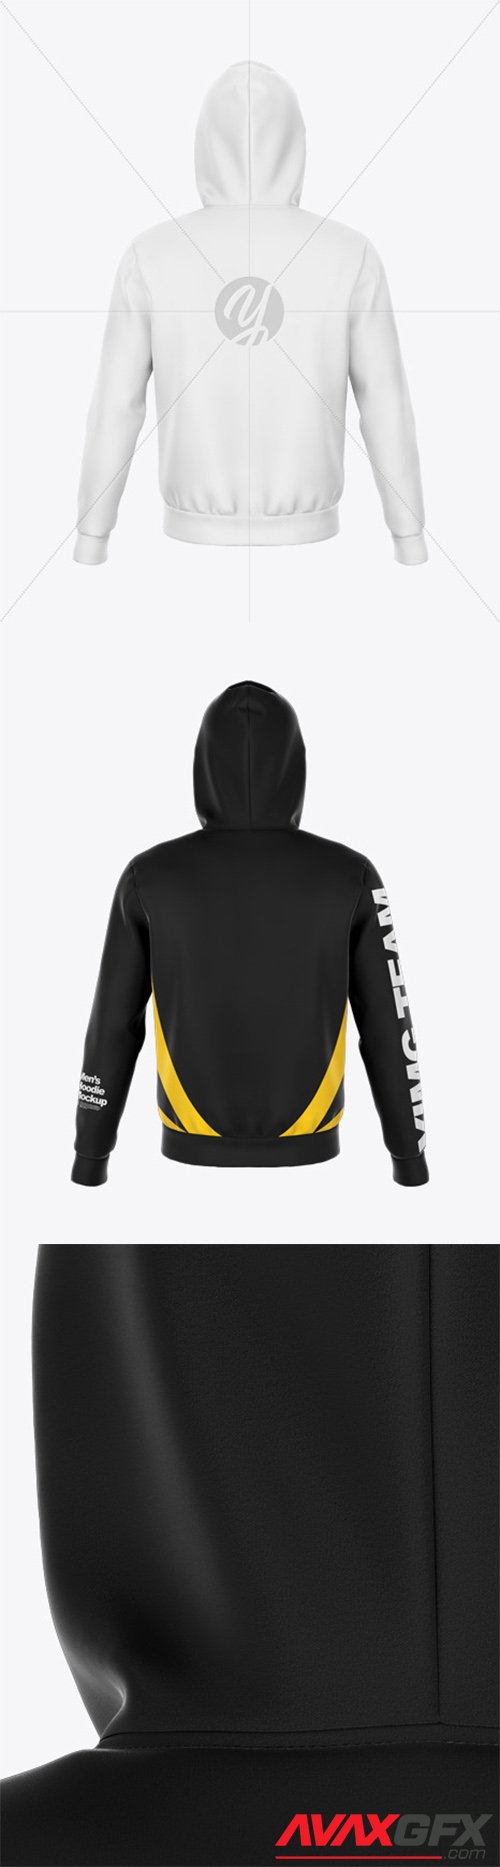 Hoodie Mockup - Back View 47625 » AVAXGFX - All Downloads that You Need ...